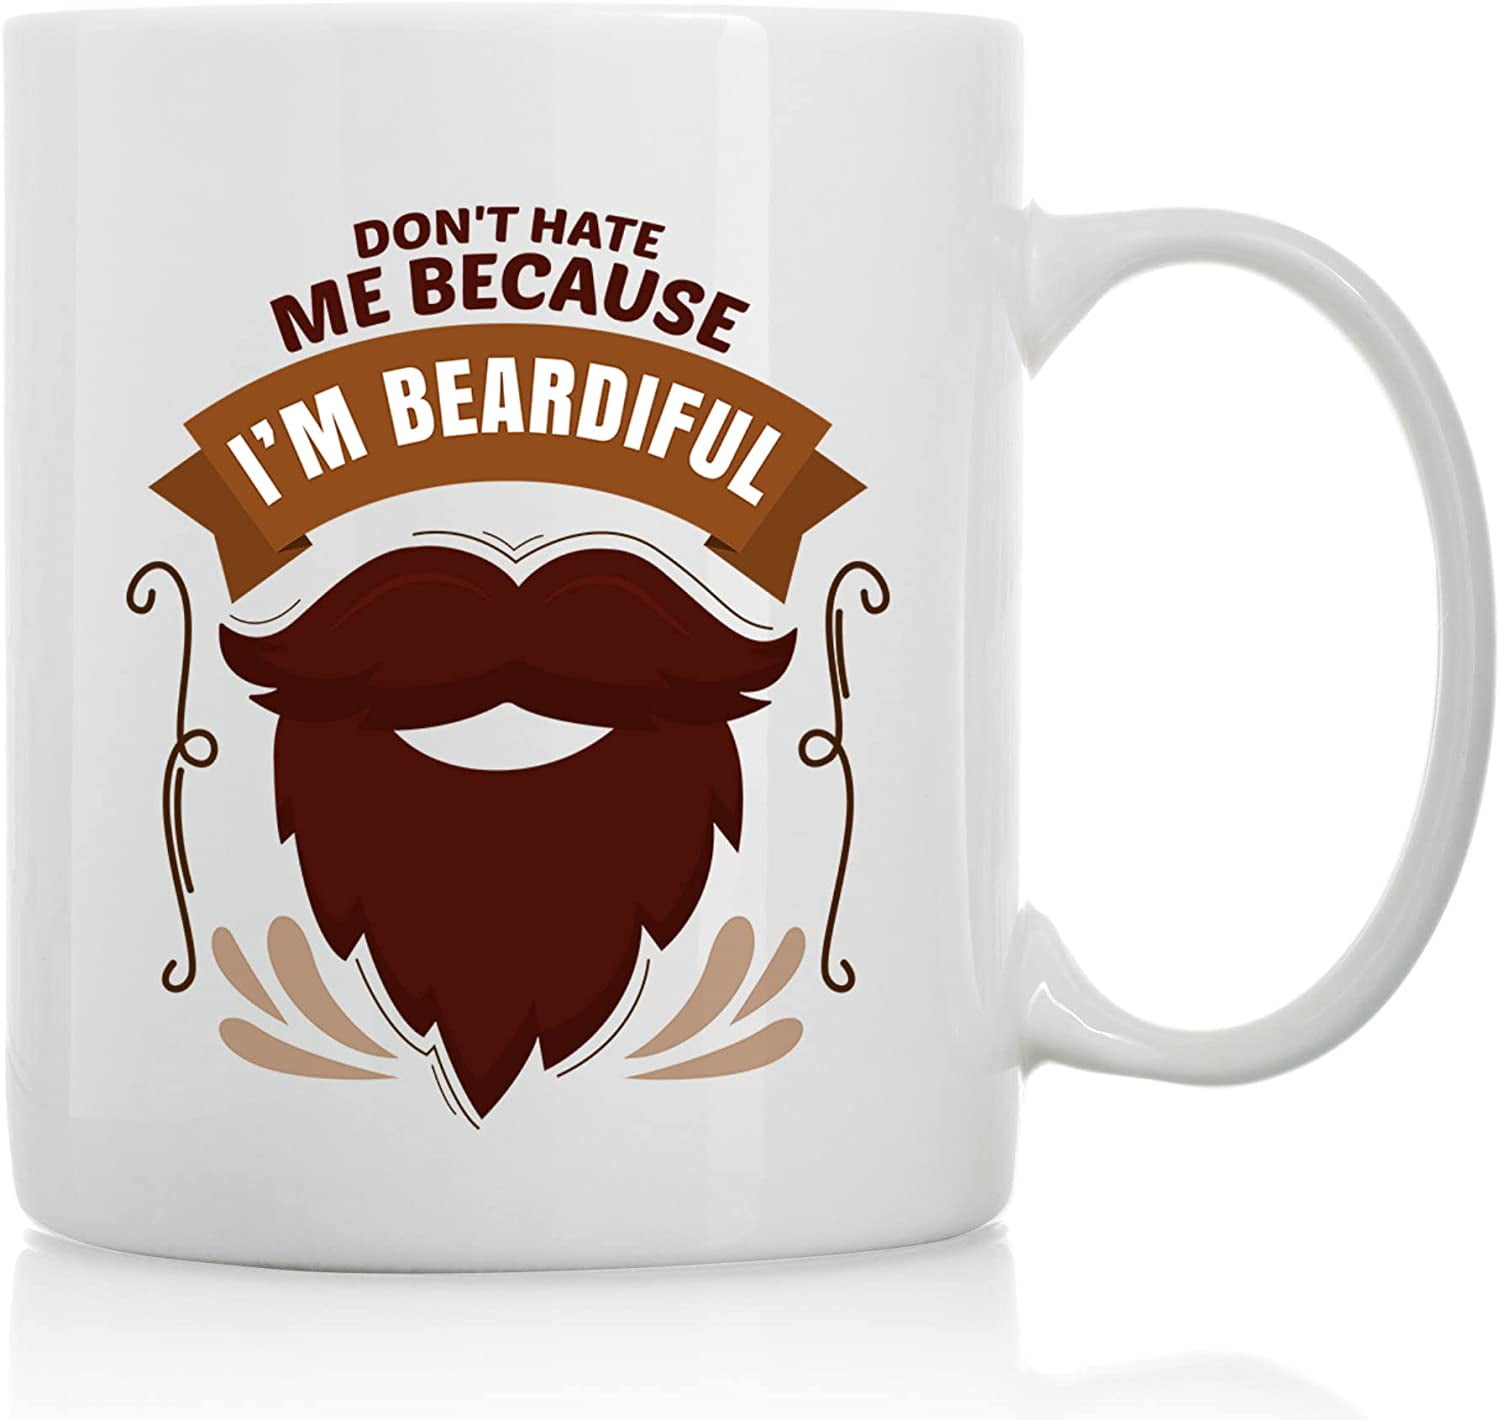 Funny Coffee Mugs for Men - Birthday, Christmas Gifts for Beard Lovers -  Bearded Dad, Brother, Uncle…See more Funny Coffee Mugs for Men - Birthday